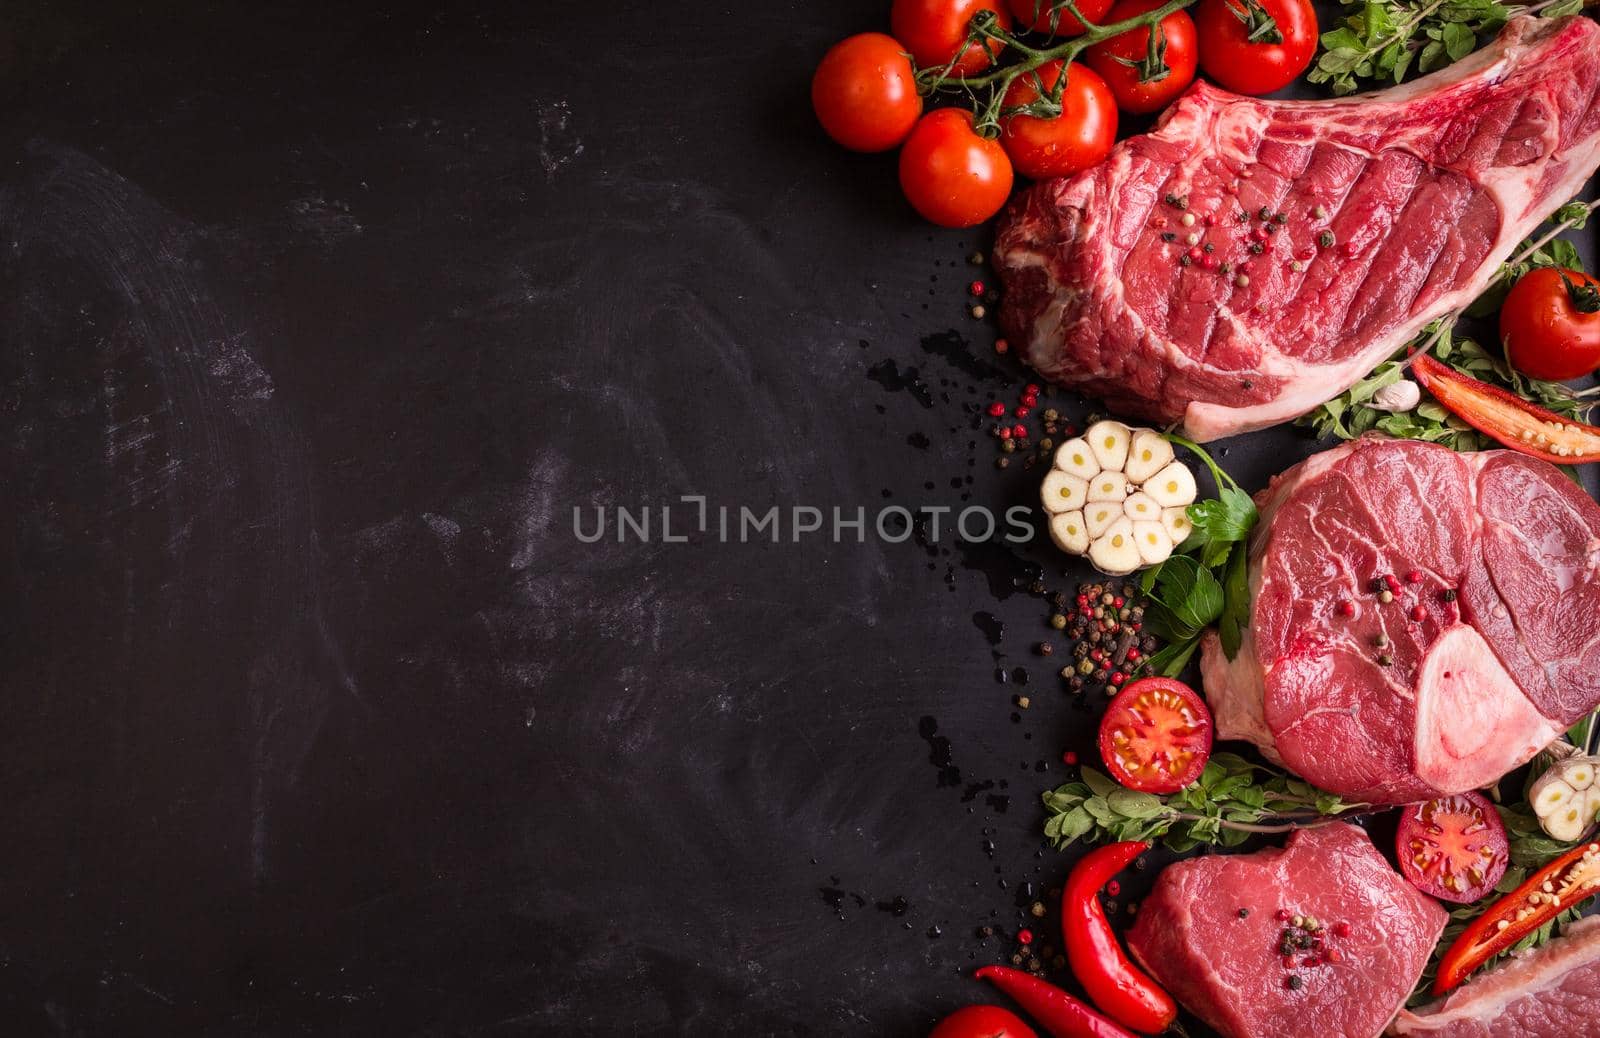 Raw juicy meat steaks ready for roasting on a black chalk board background. Rib eye steak on the bone, veal shank (ossobuco), fillet with cherry tomatoes, hot pepper and herbs. Space for text